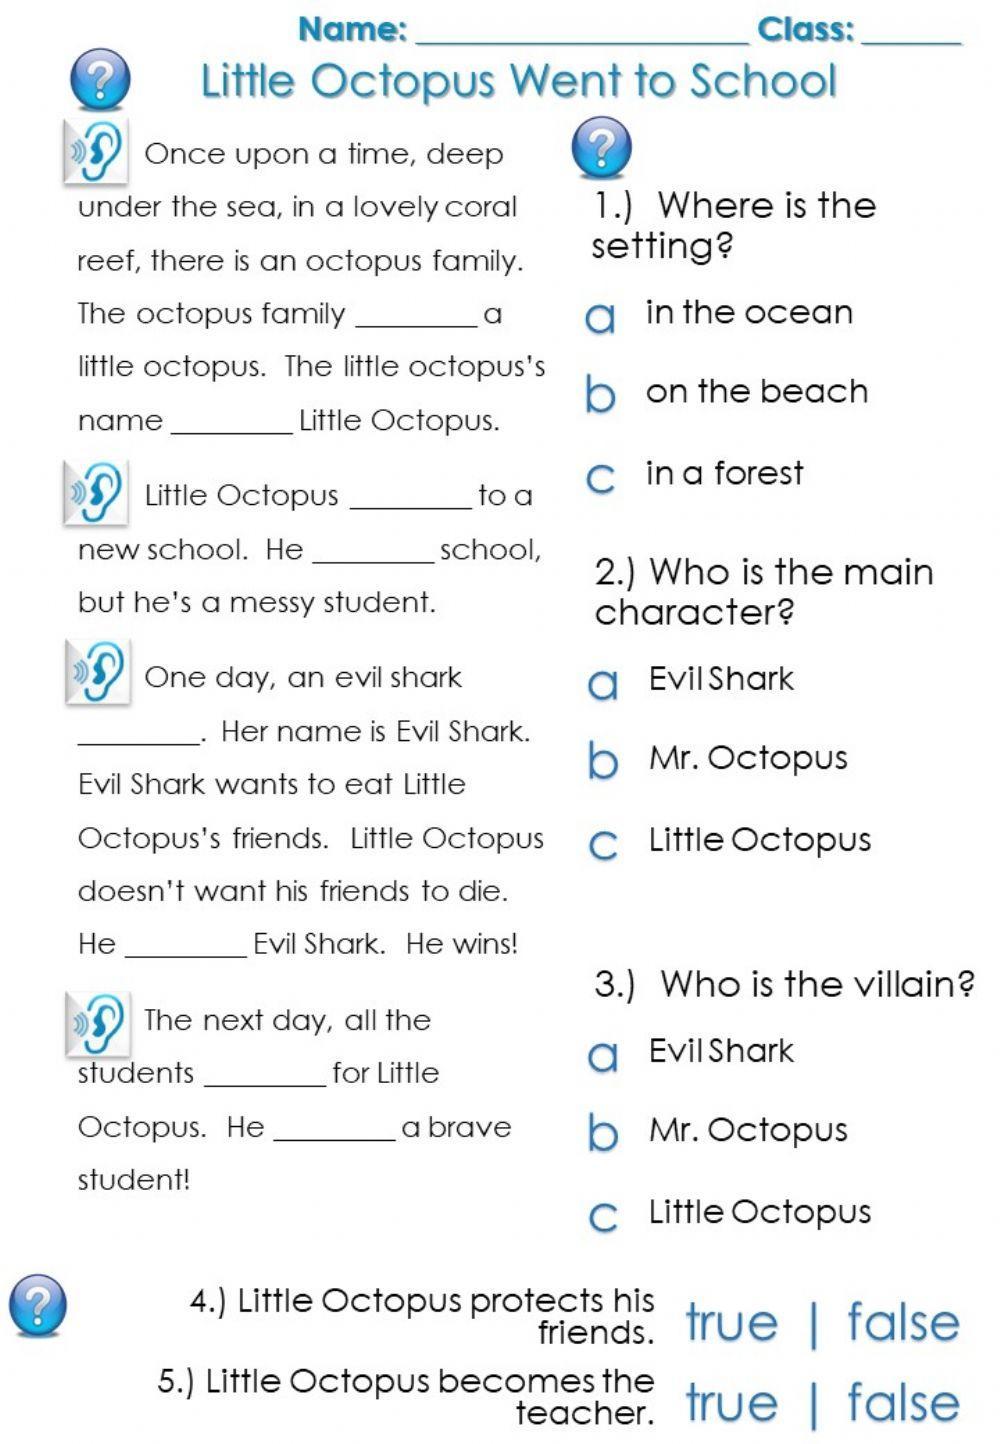 Little Octopus Goes to School - Reading